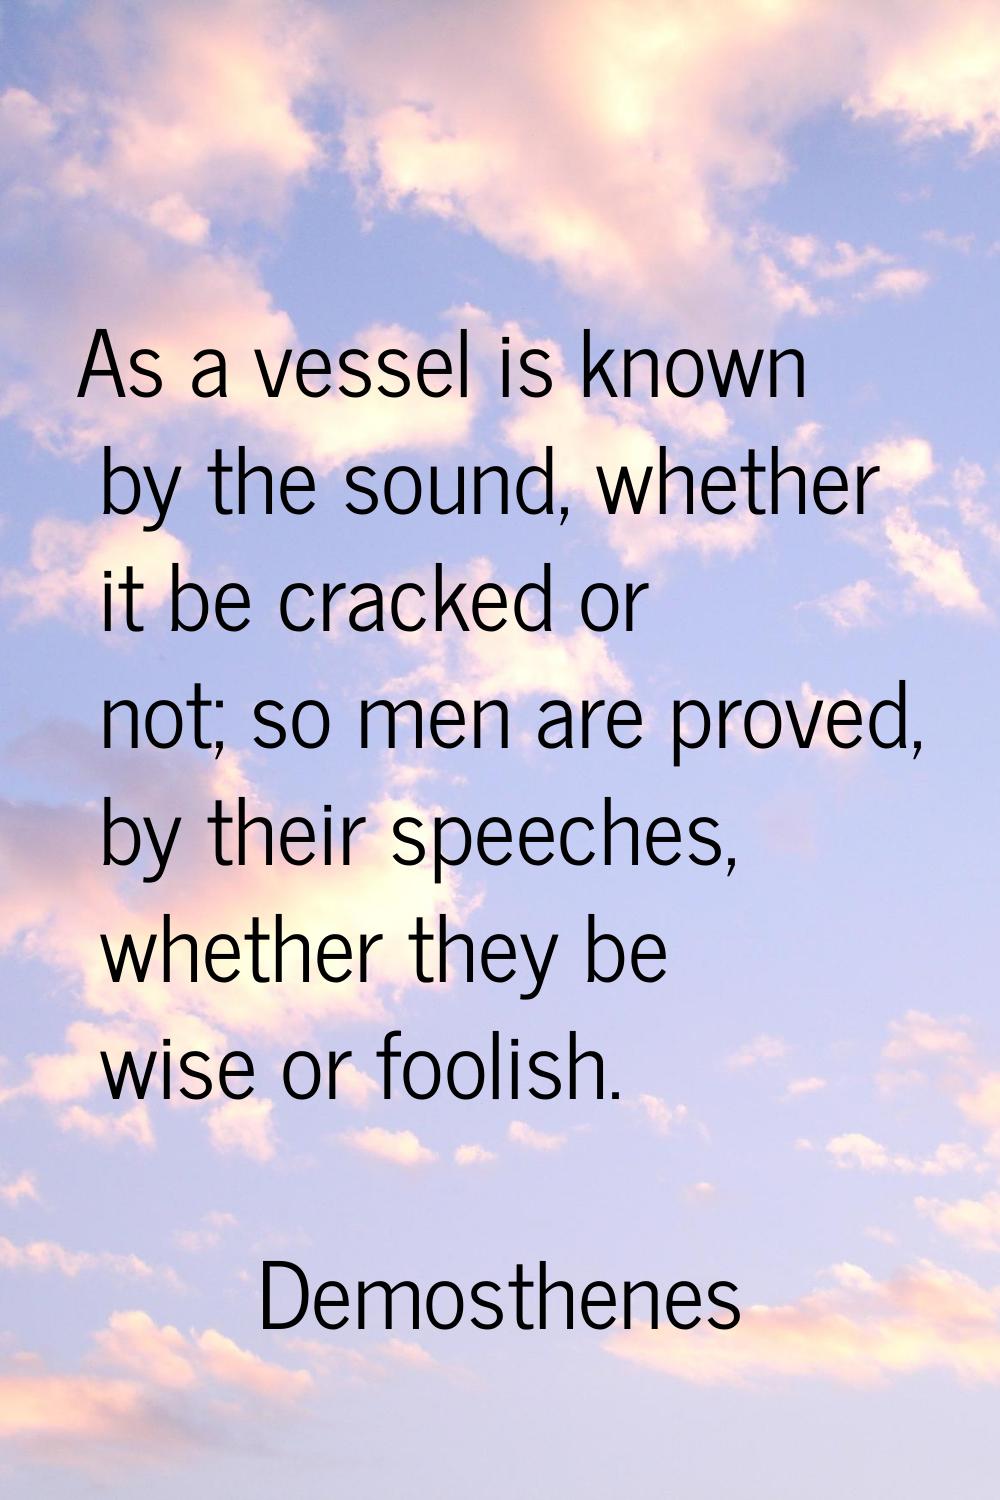 As a vessel is known by the sound, whether it be cracked or not; so men are proved, by their speech